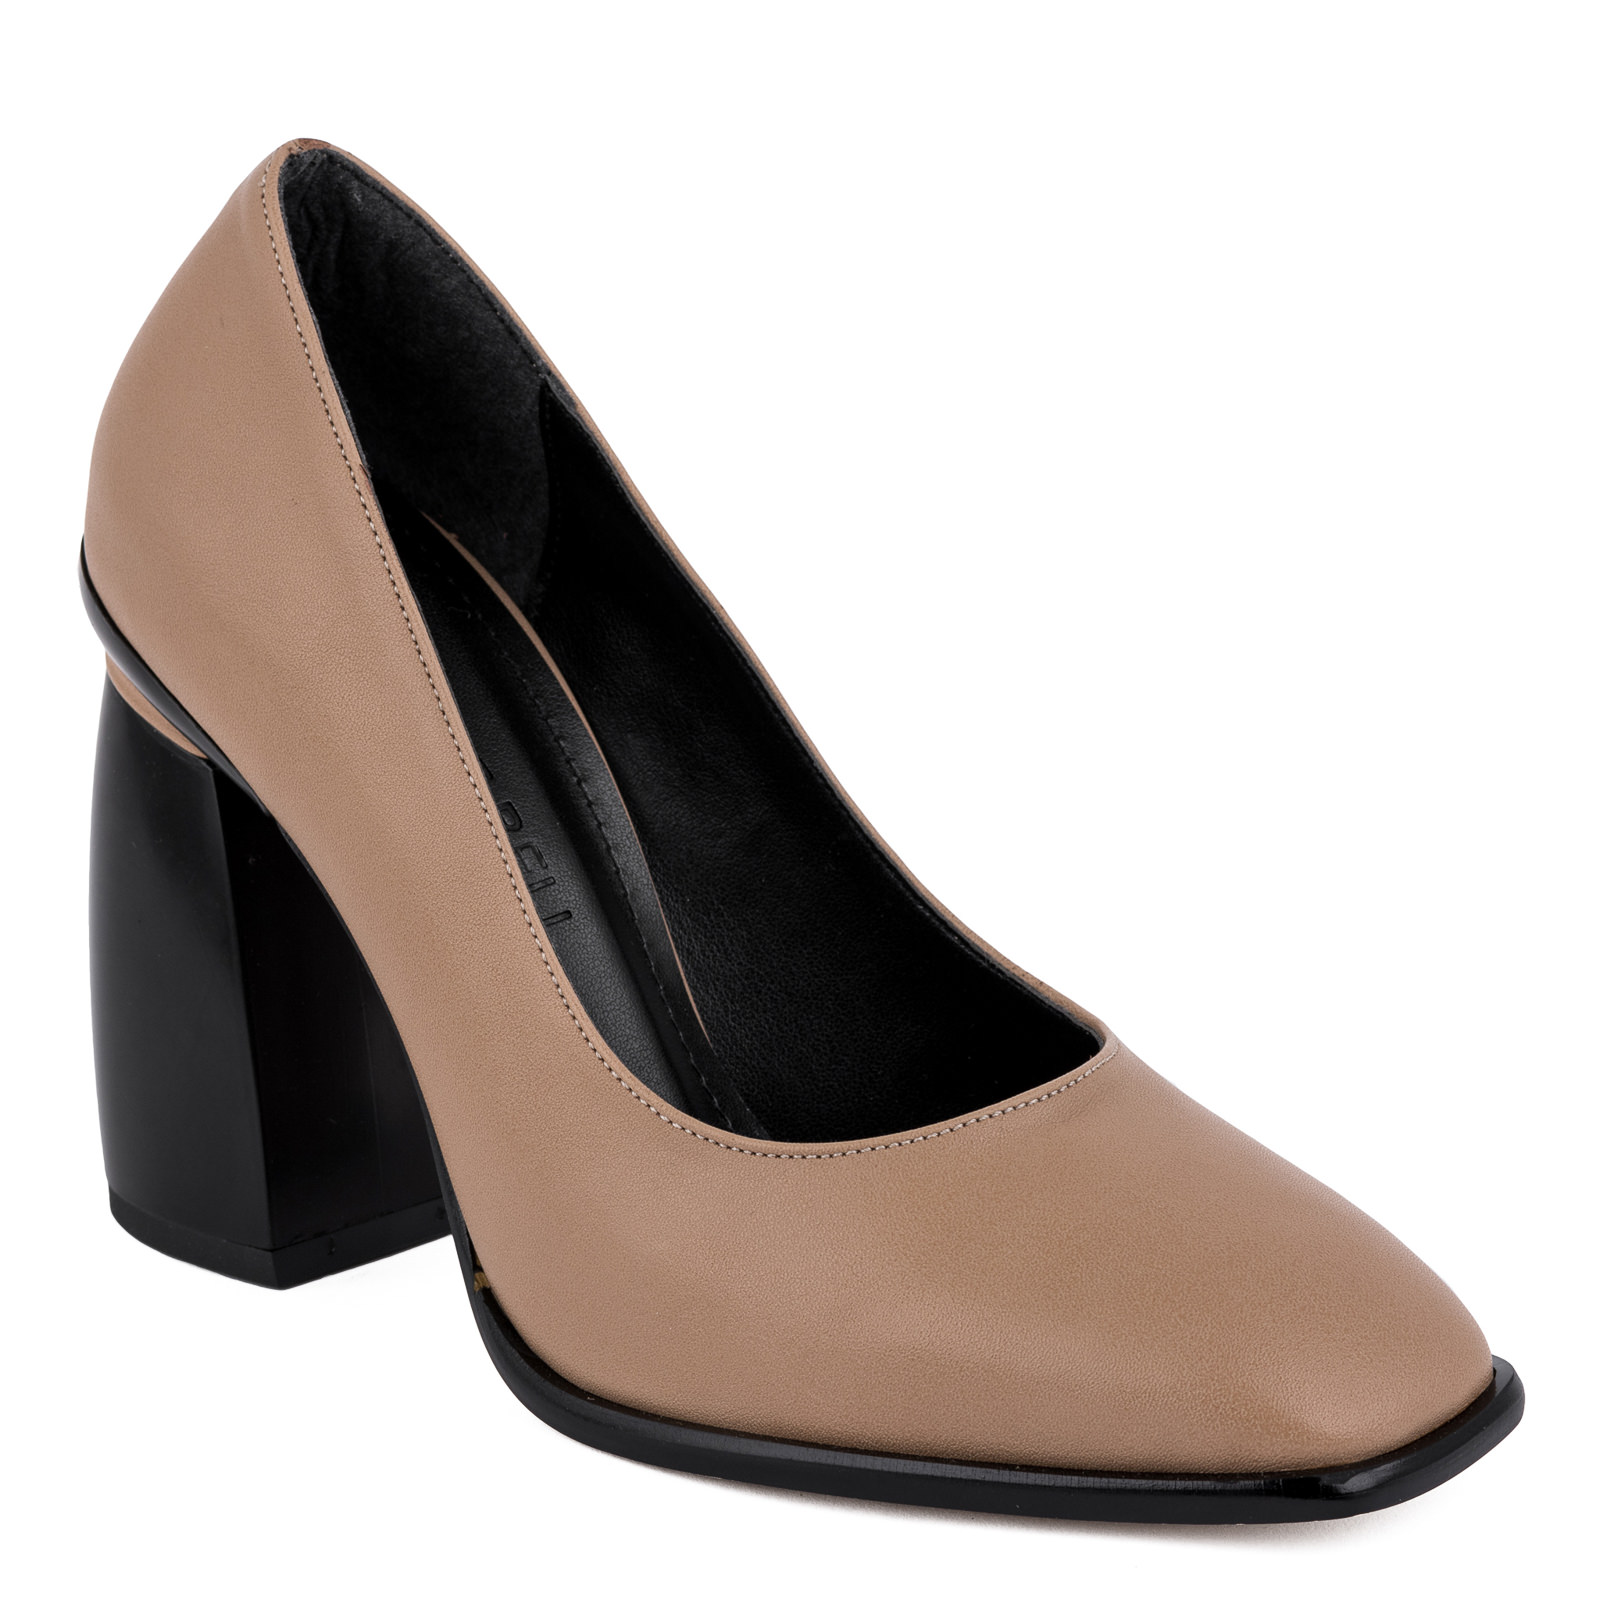 STILETTO SHOES WITH THICK HEEL - BEIGE/BLACK